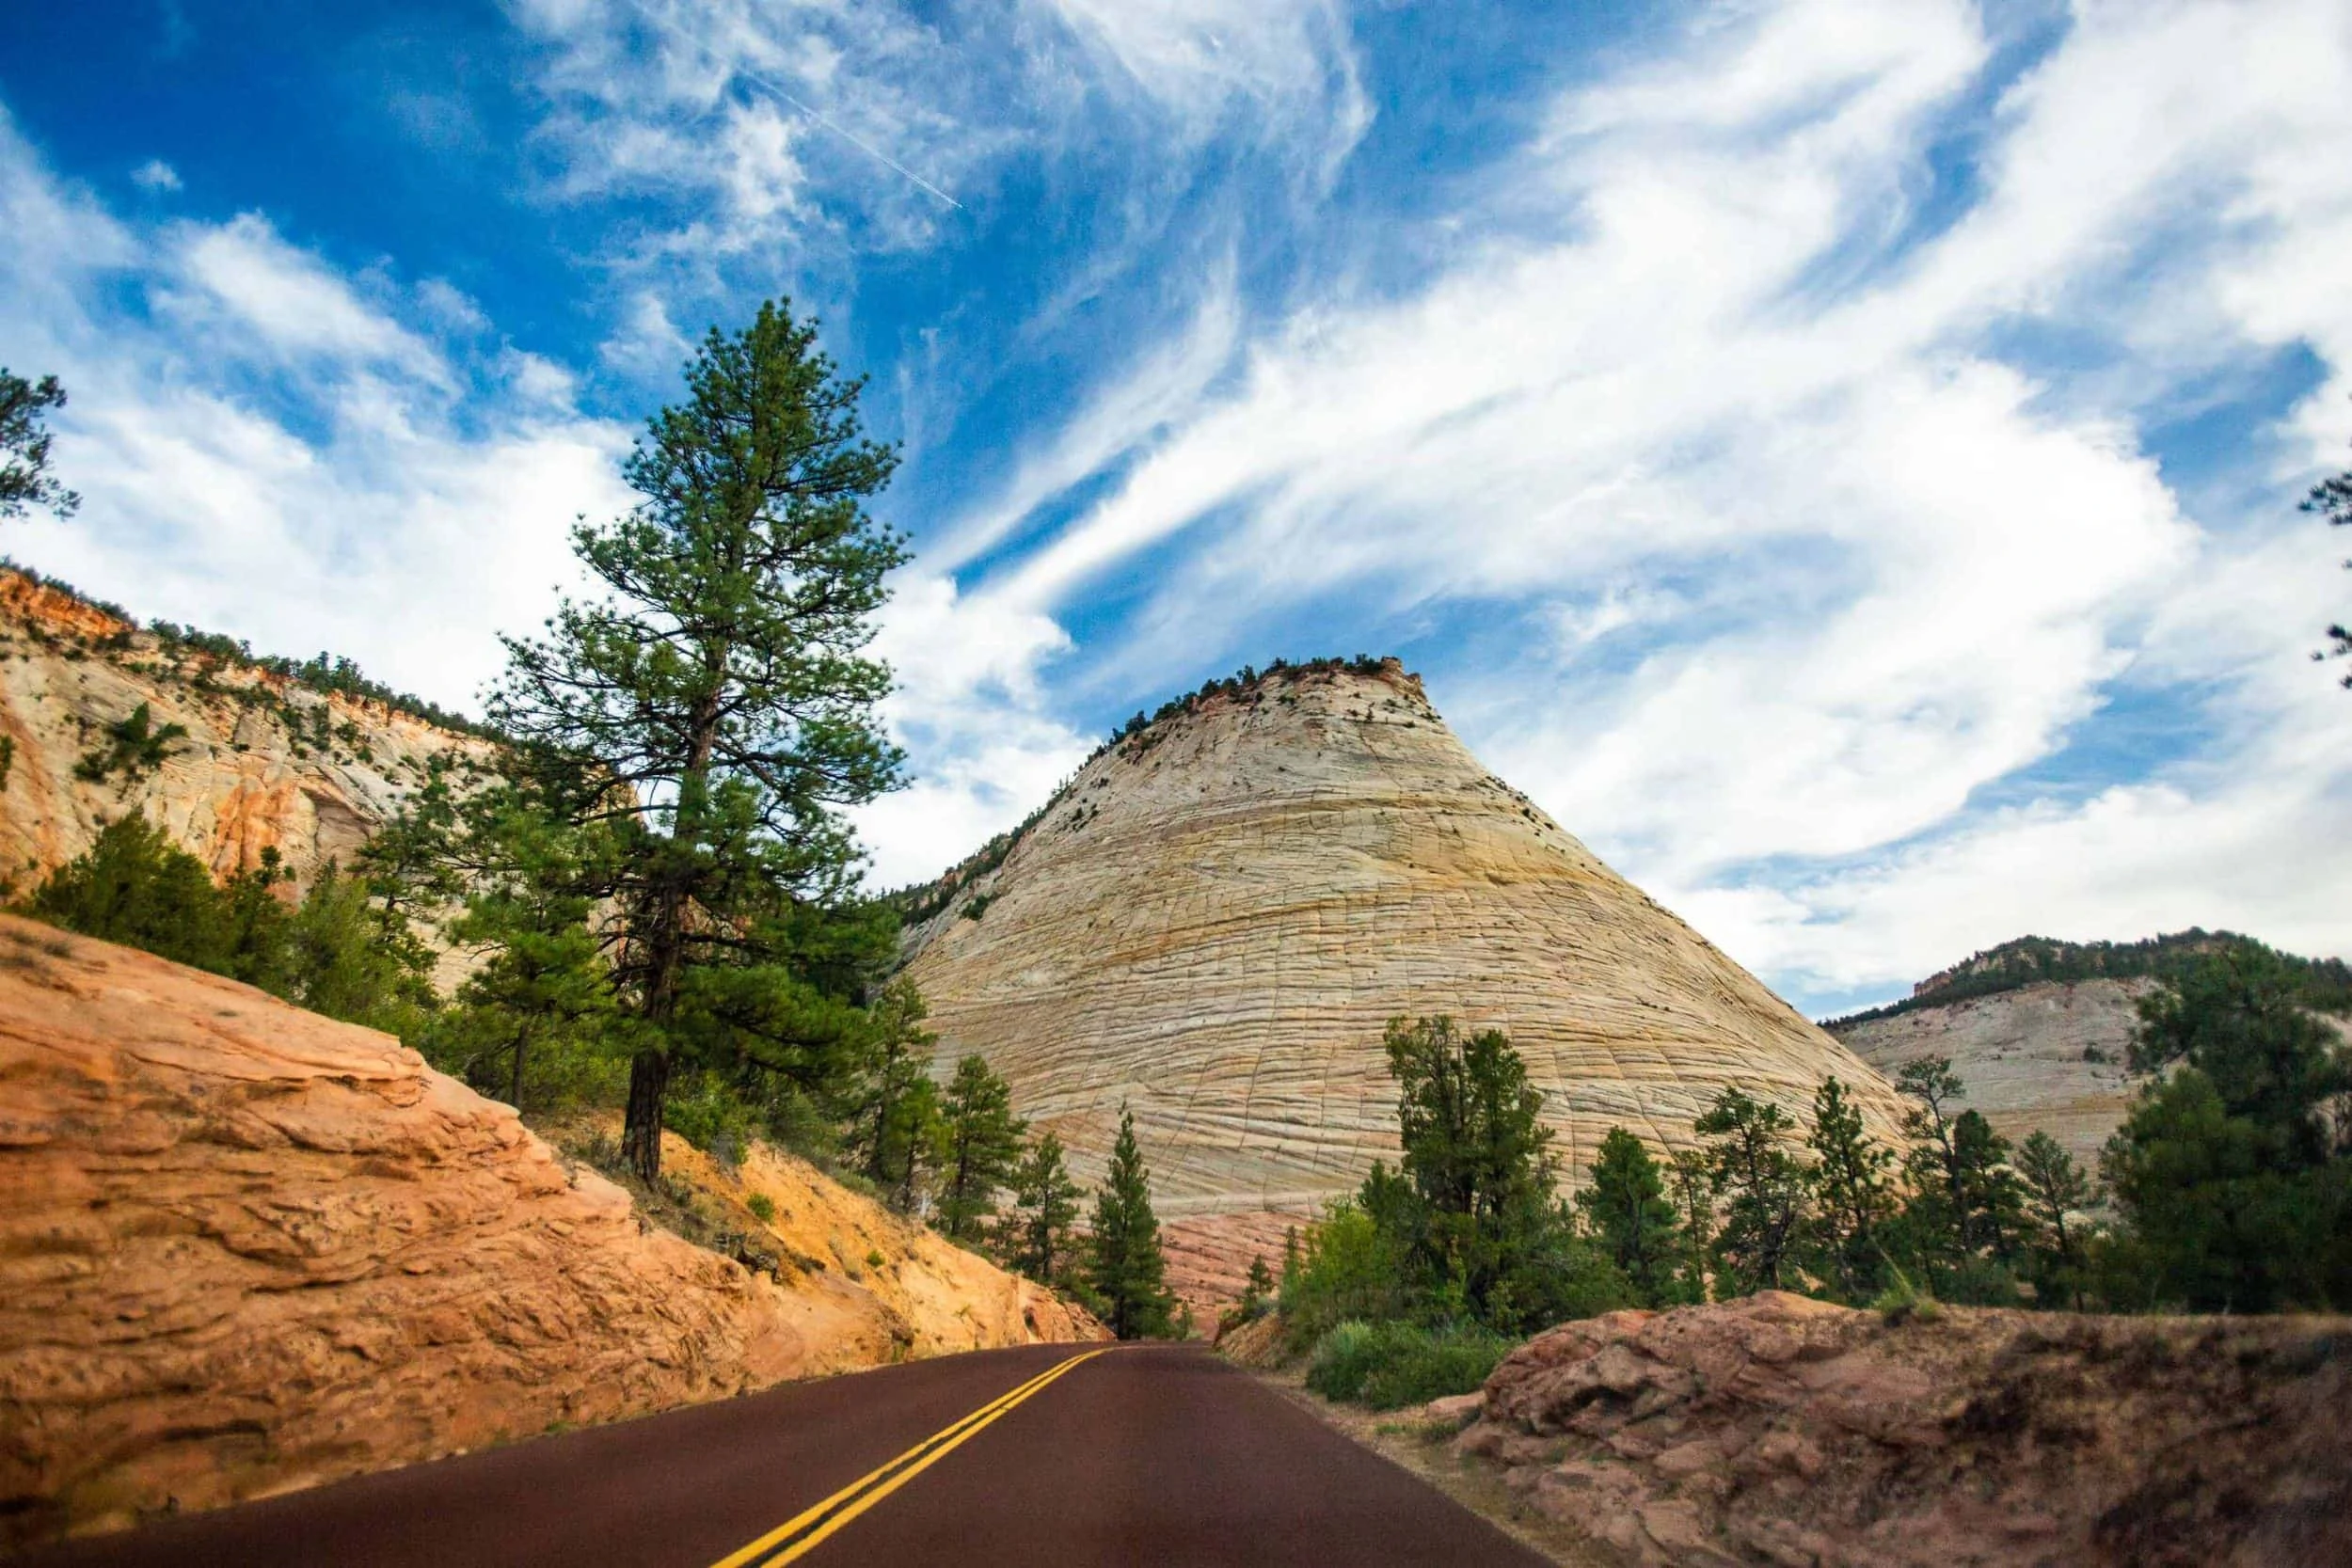 A large petrified beehive rock formation in Zion National Park on east portal road, framed by green conifers, a long stretch of road, and blue sky with clouds.